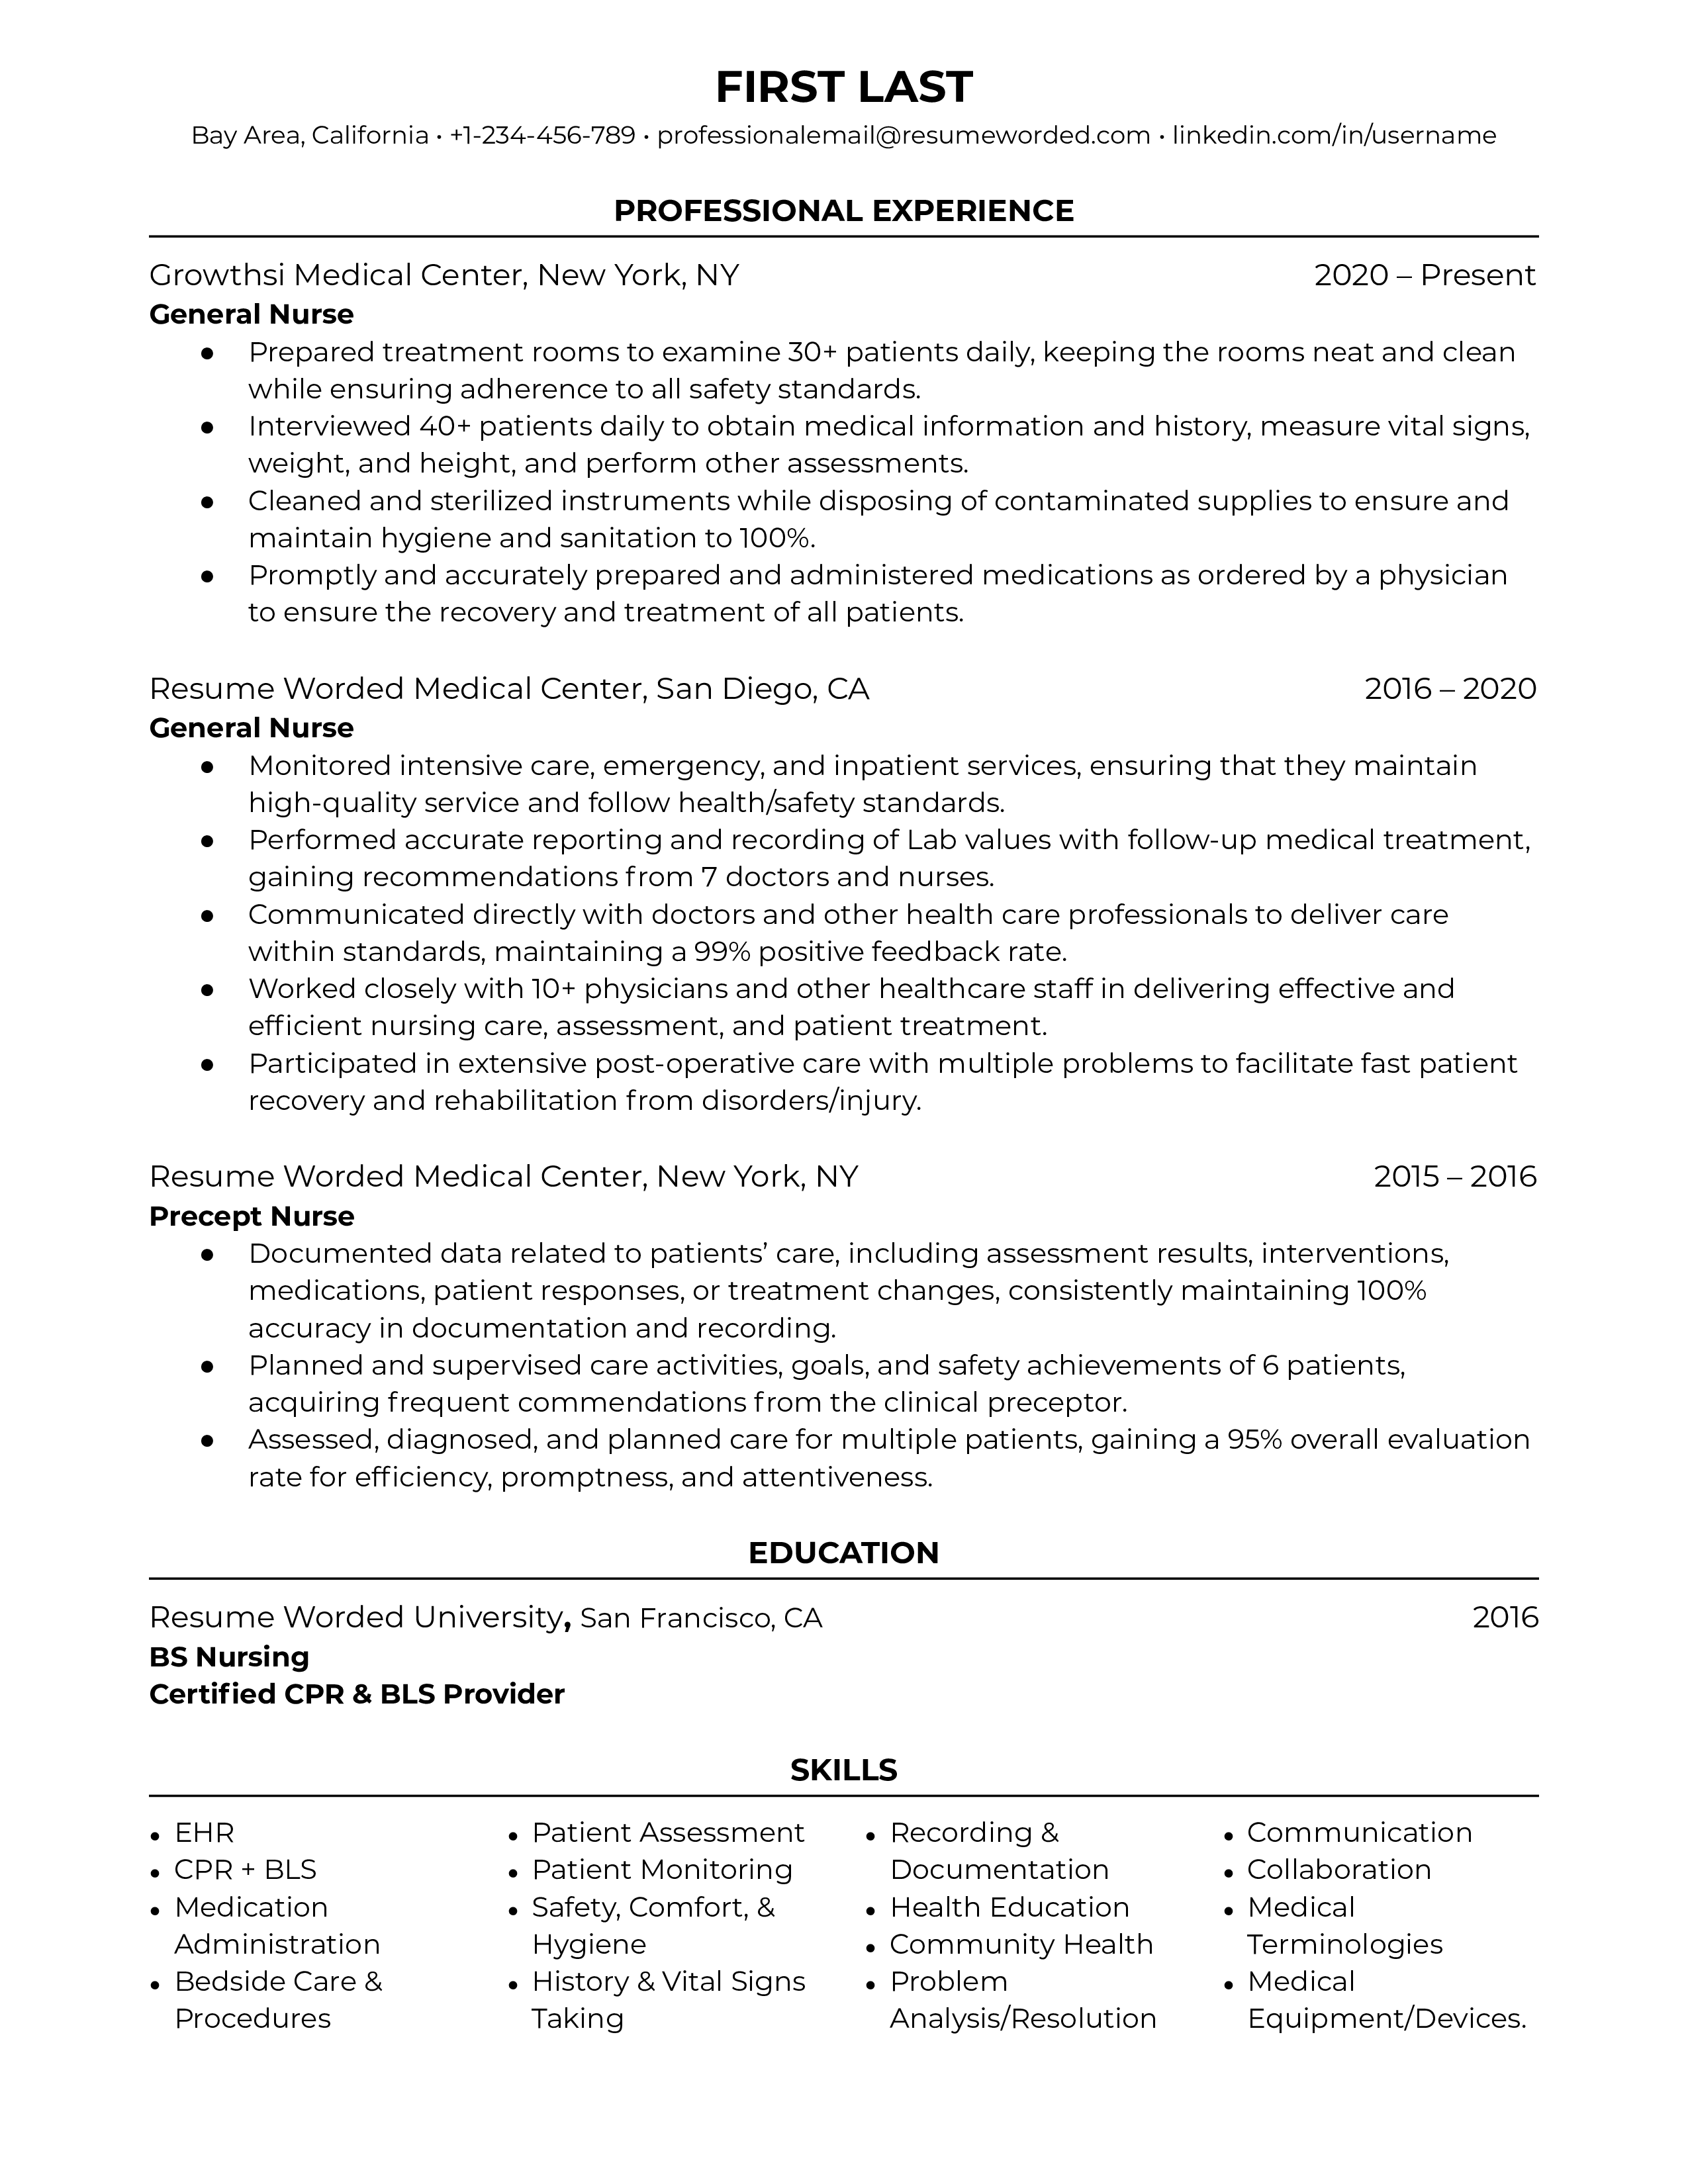 A resume for a general nurse with an associates degree and prior experience as a healthcare assistant.